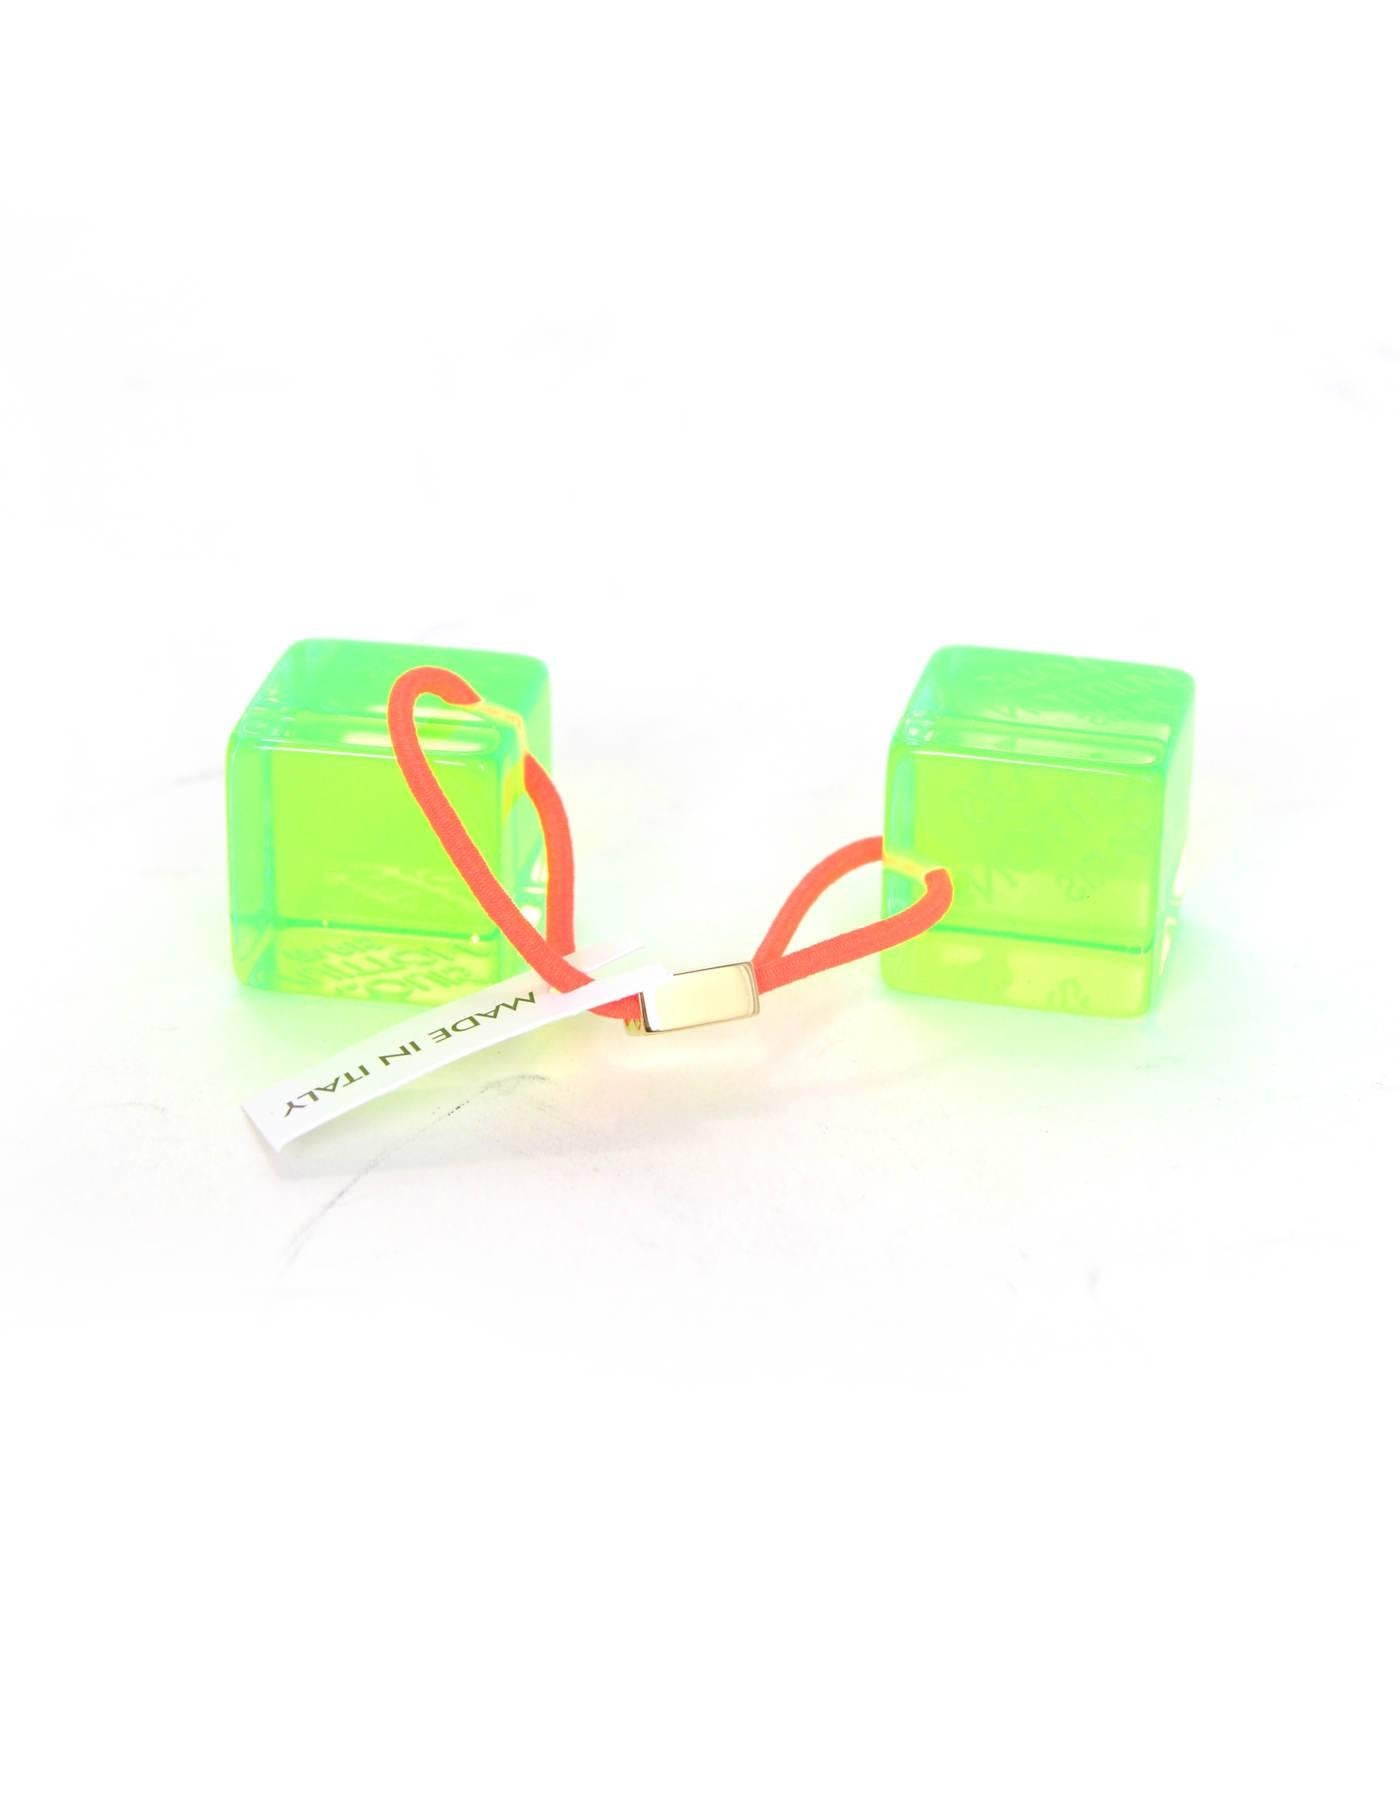 Louis Vuitton Green Lucite Hair Cubes

Made In: Italy
Color: Green
Hardware: Goldtone
Materials: Lucite, brass, elasticized band
Retail Price: $295 + tax
Overall Condition: Excellent pre-owned condition
Measurements: 
1